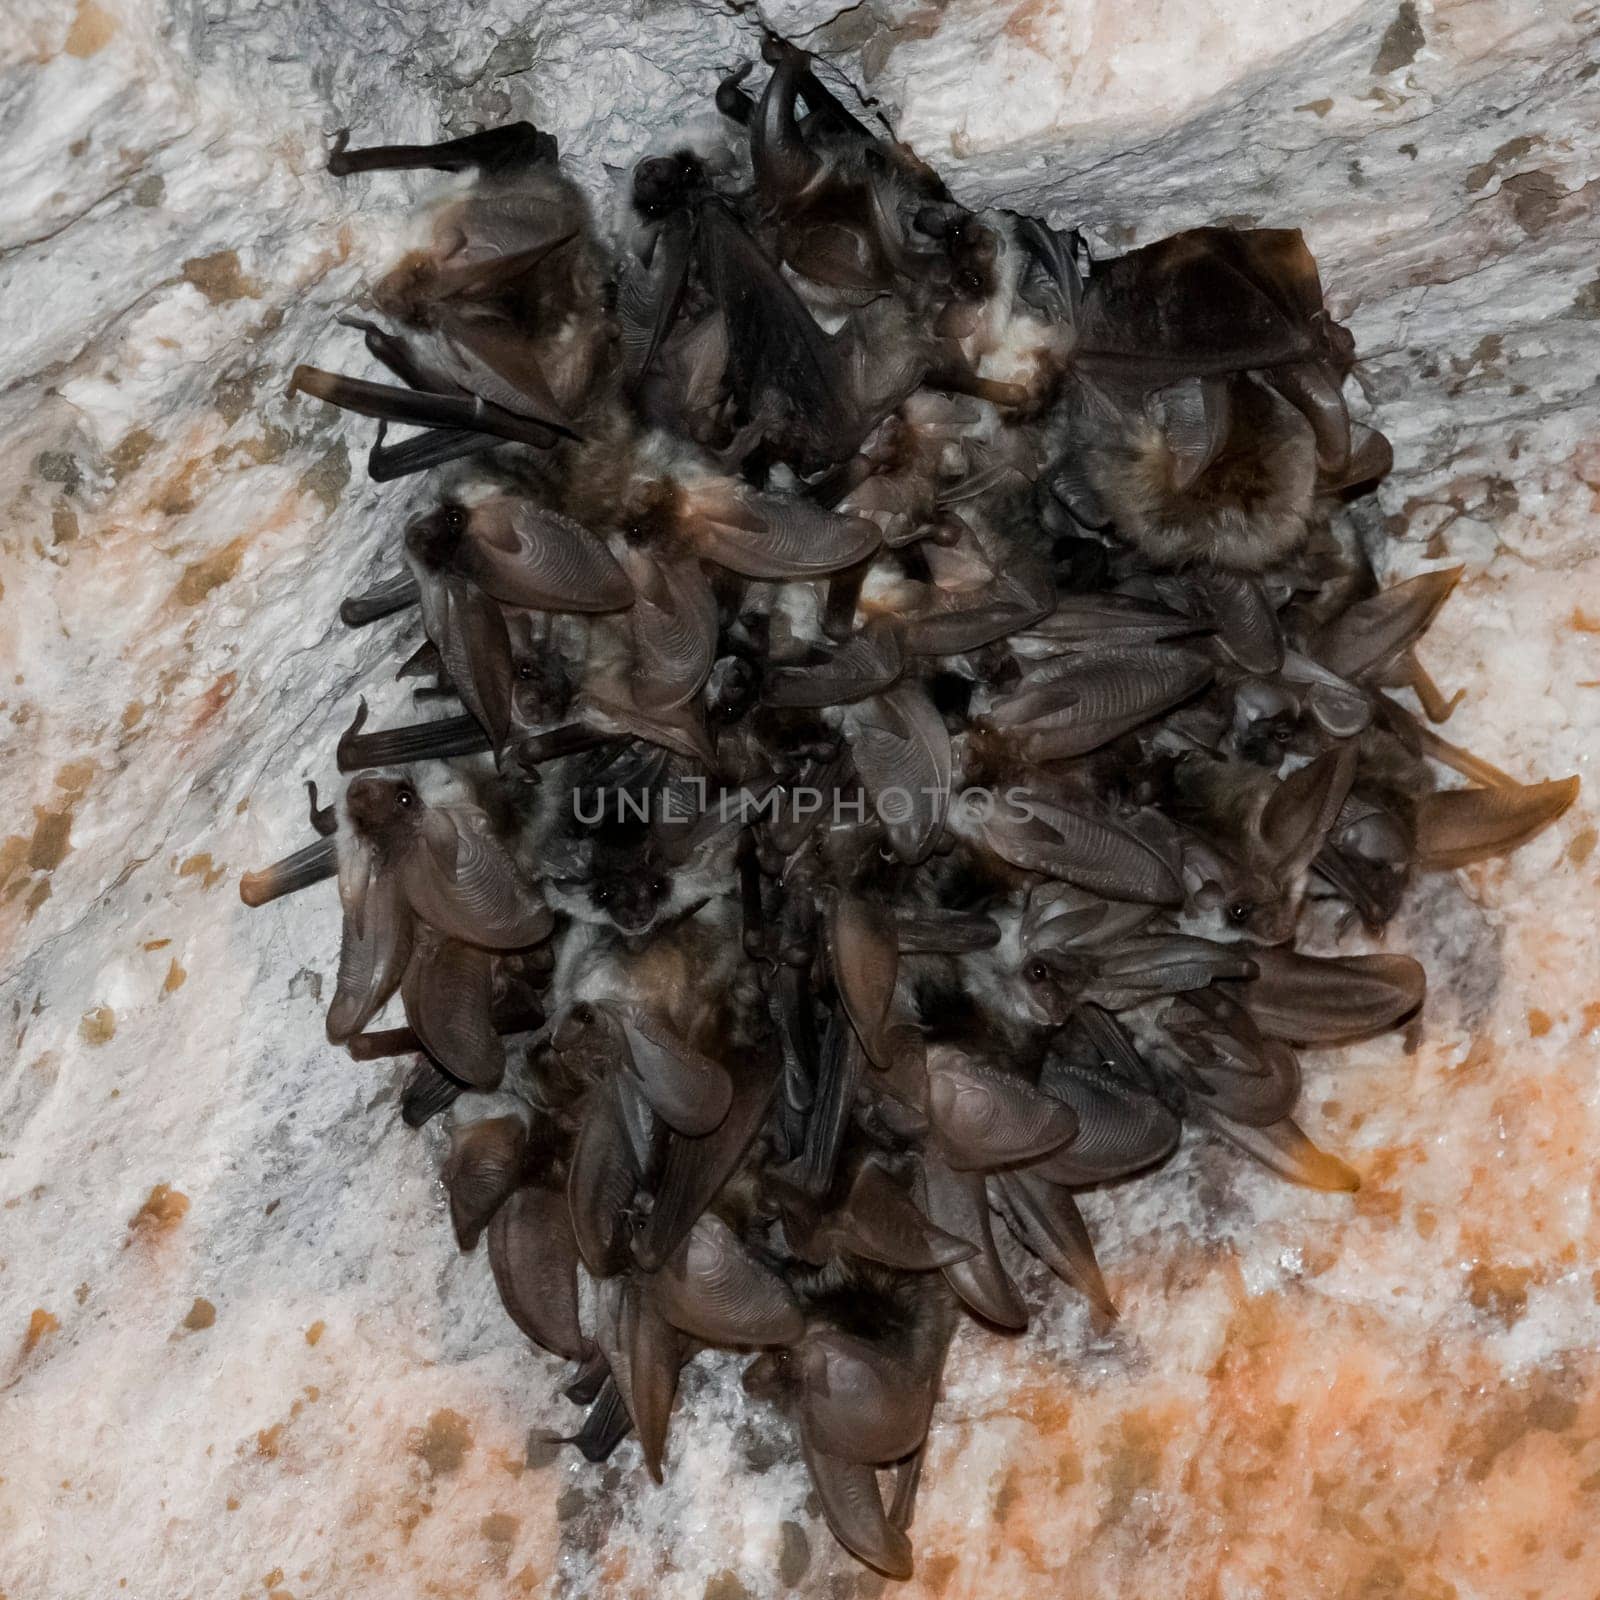 Bat group hanging from salt mine by AndreaIzzotti